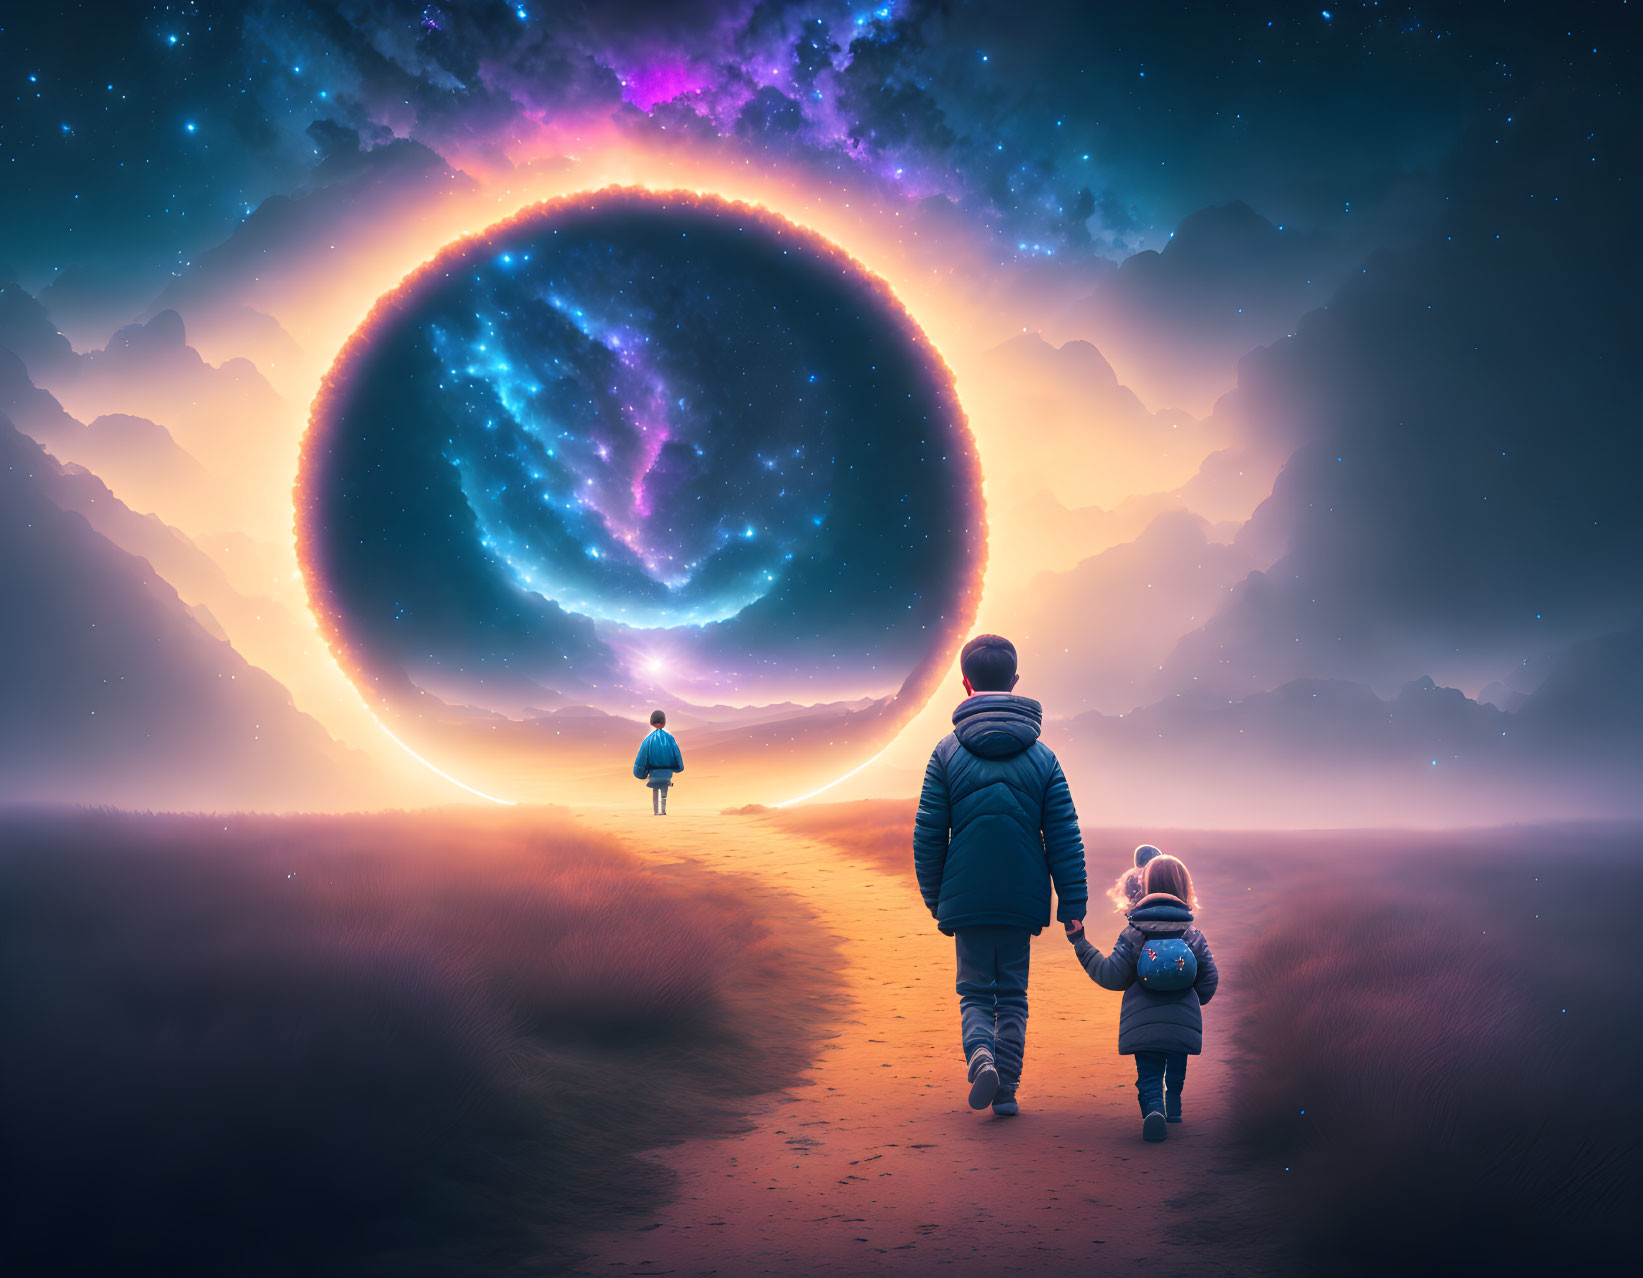 Two people approaching a glowing cosmic portal in a starry mountain landscape at dusk